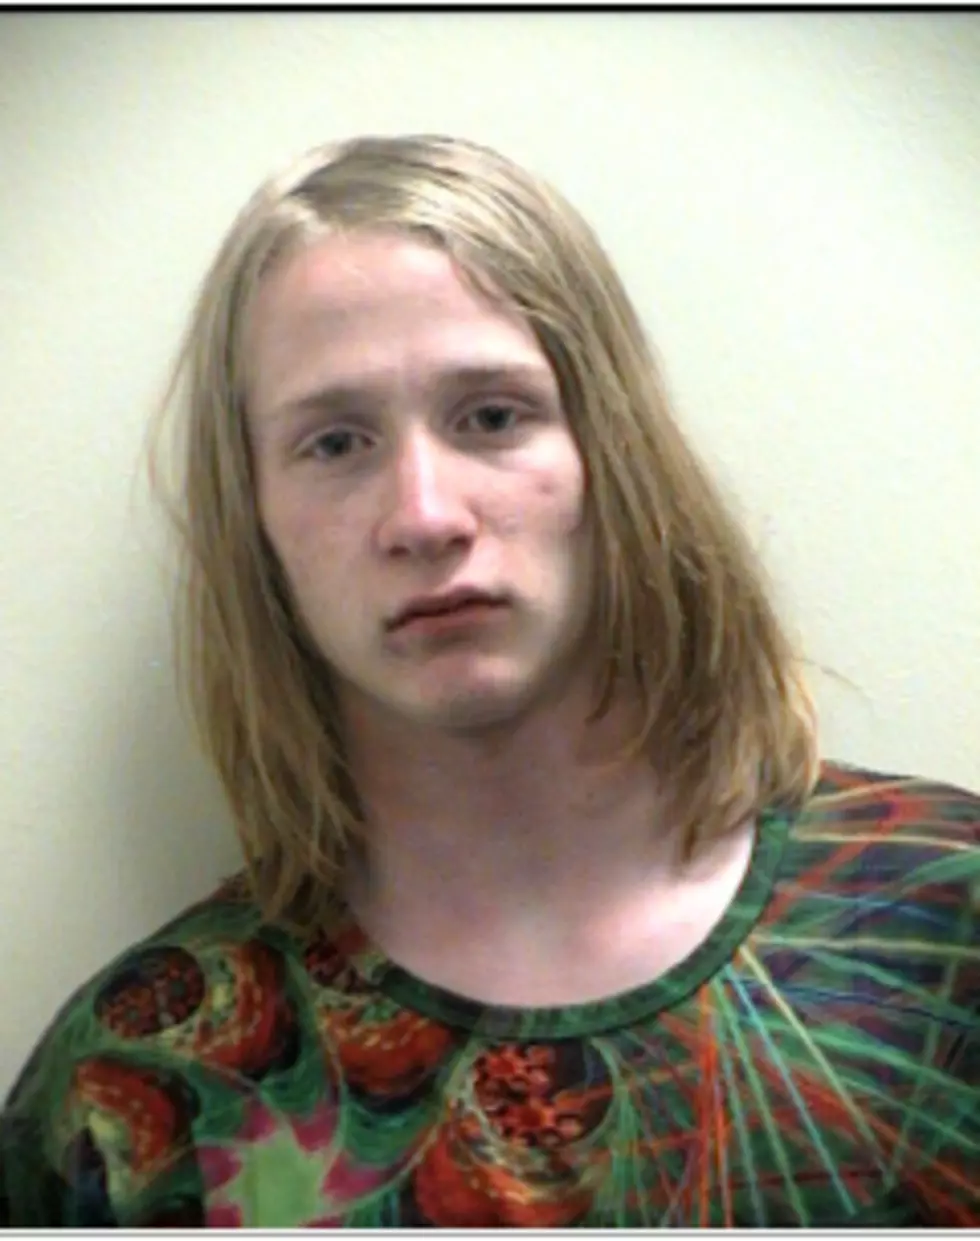 Northern Colorado Teen Wanted for Attempted Murder Identified, Still On the Loose